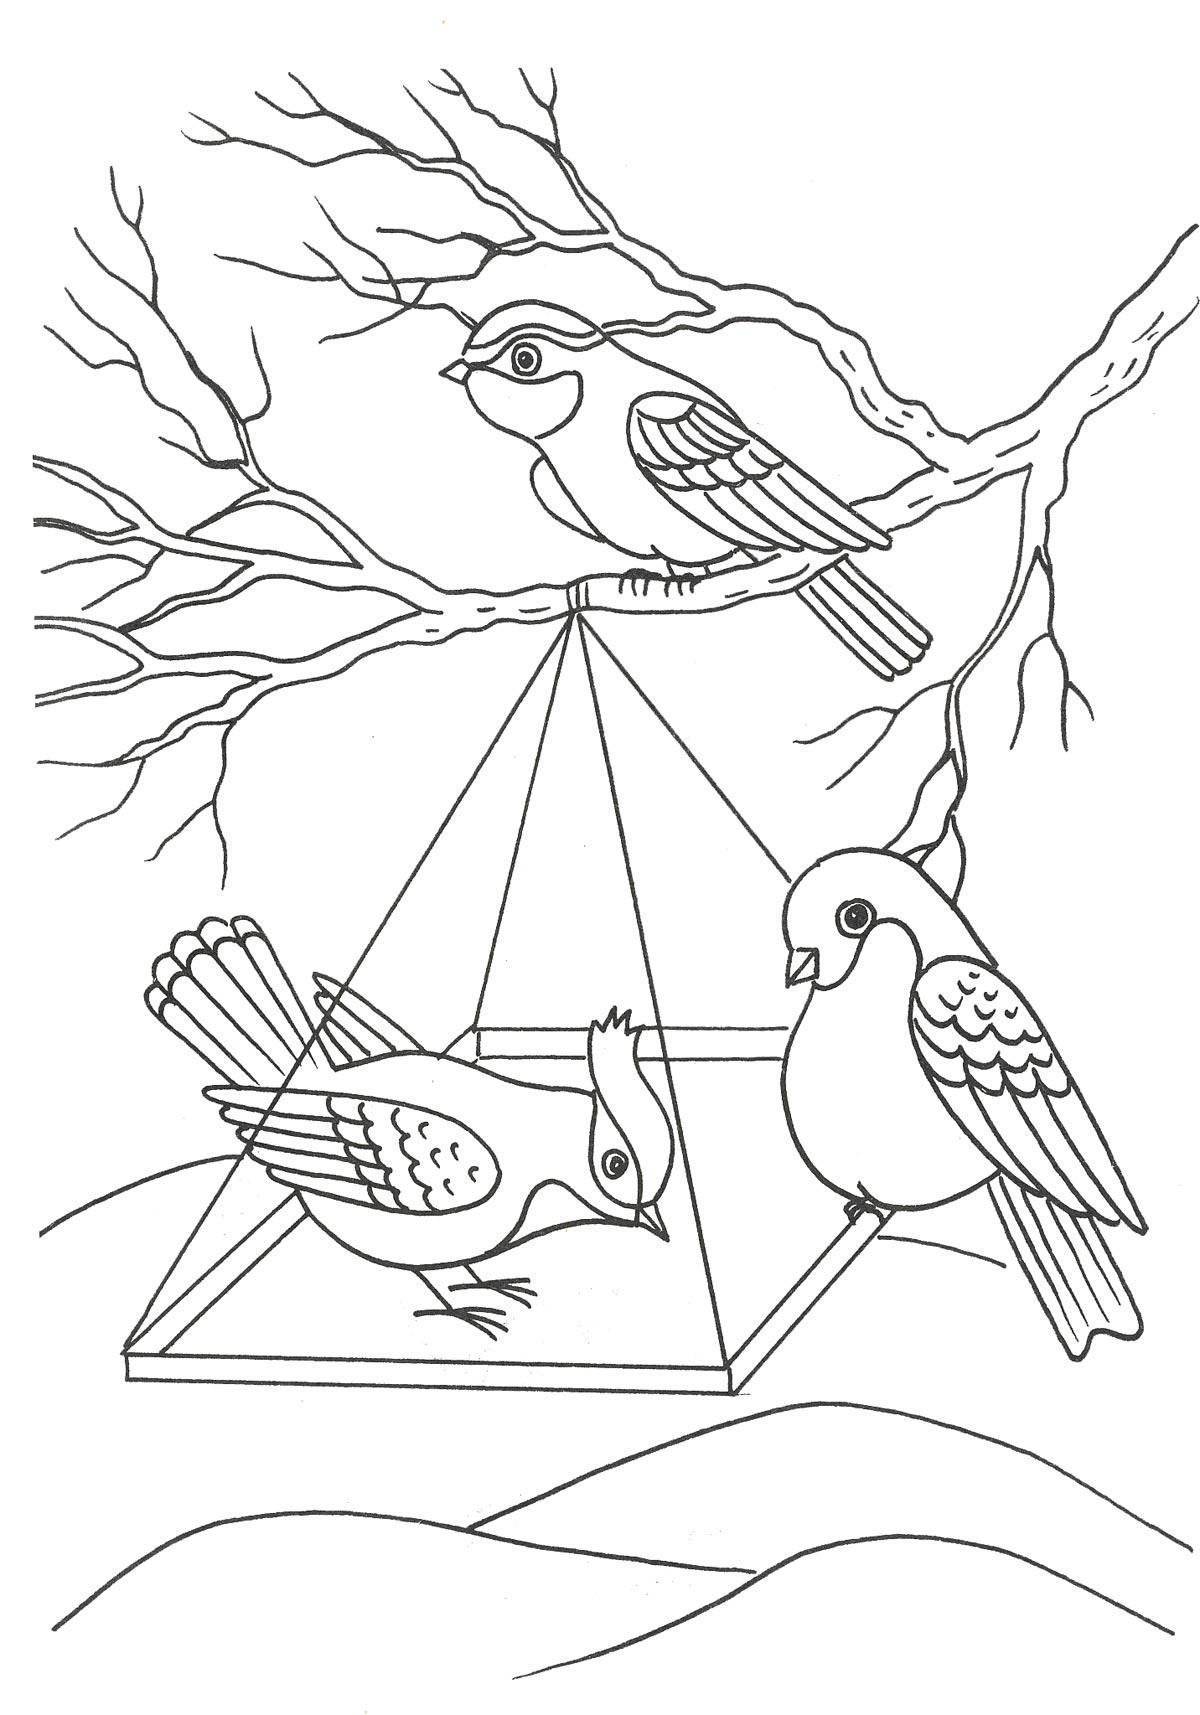 Exotic wintering birds coloring book for kids